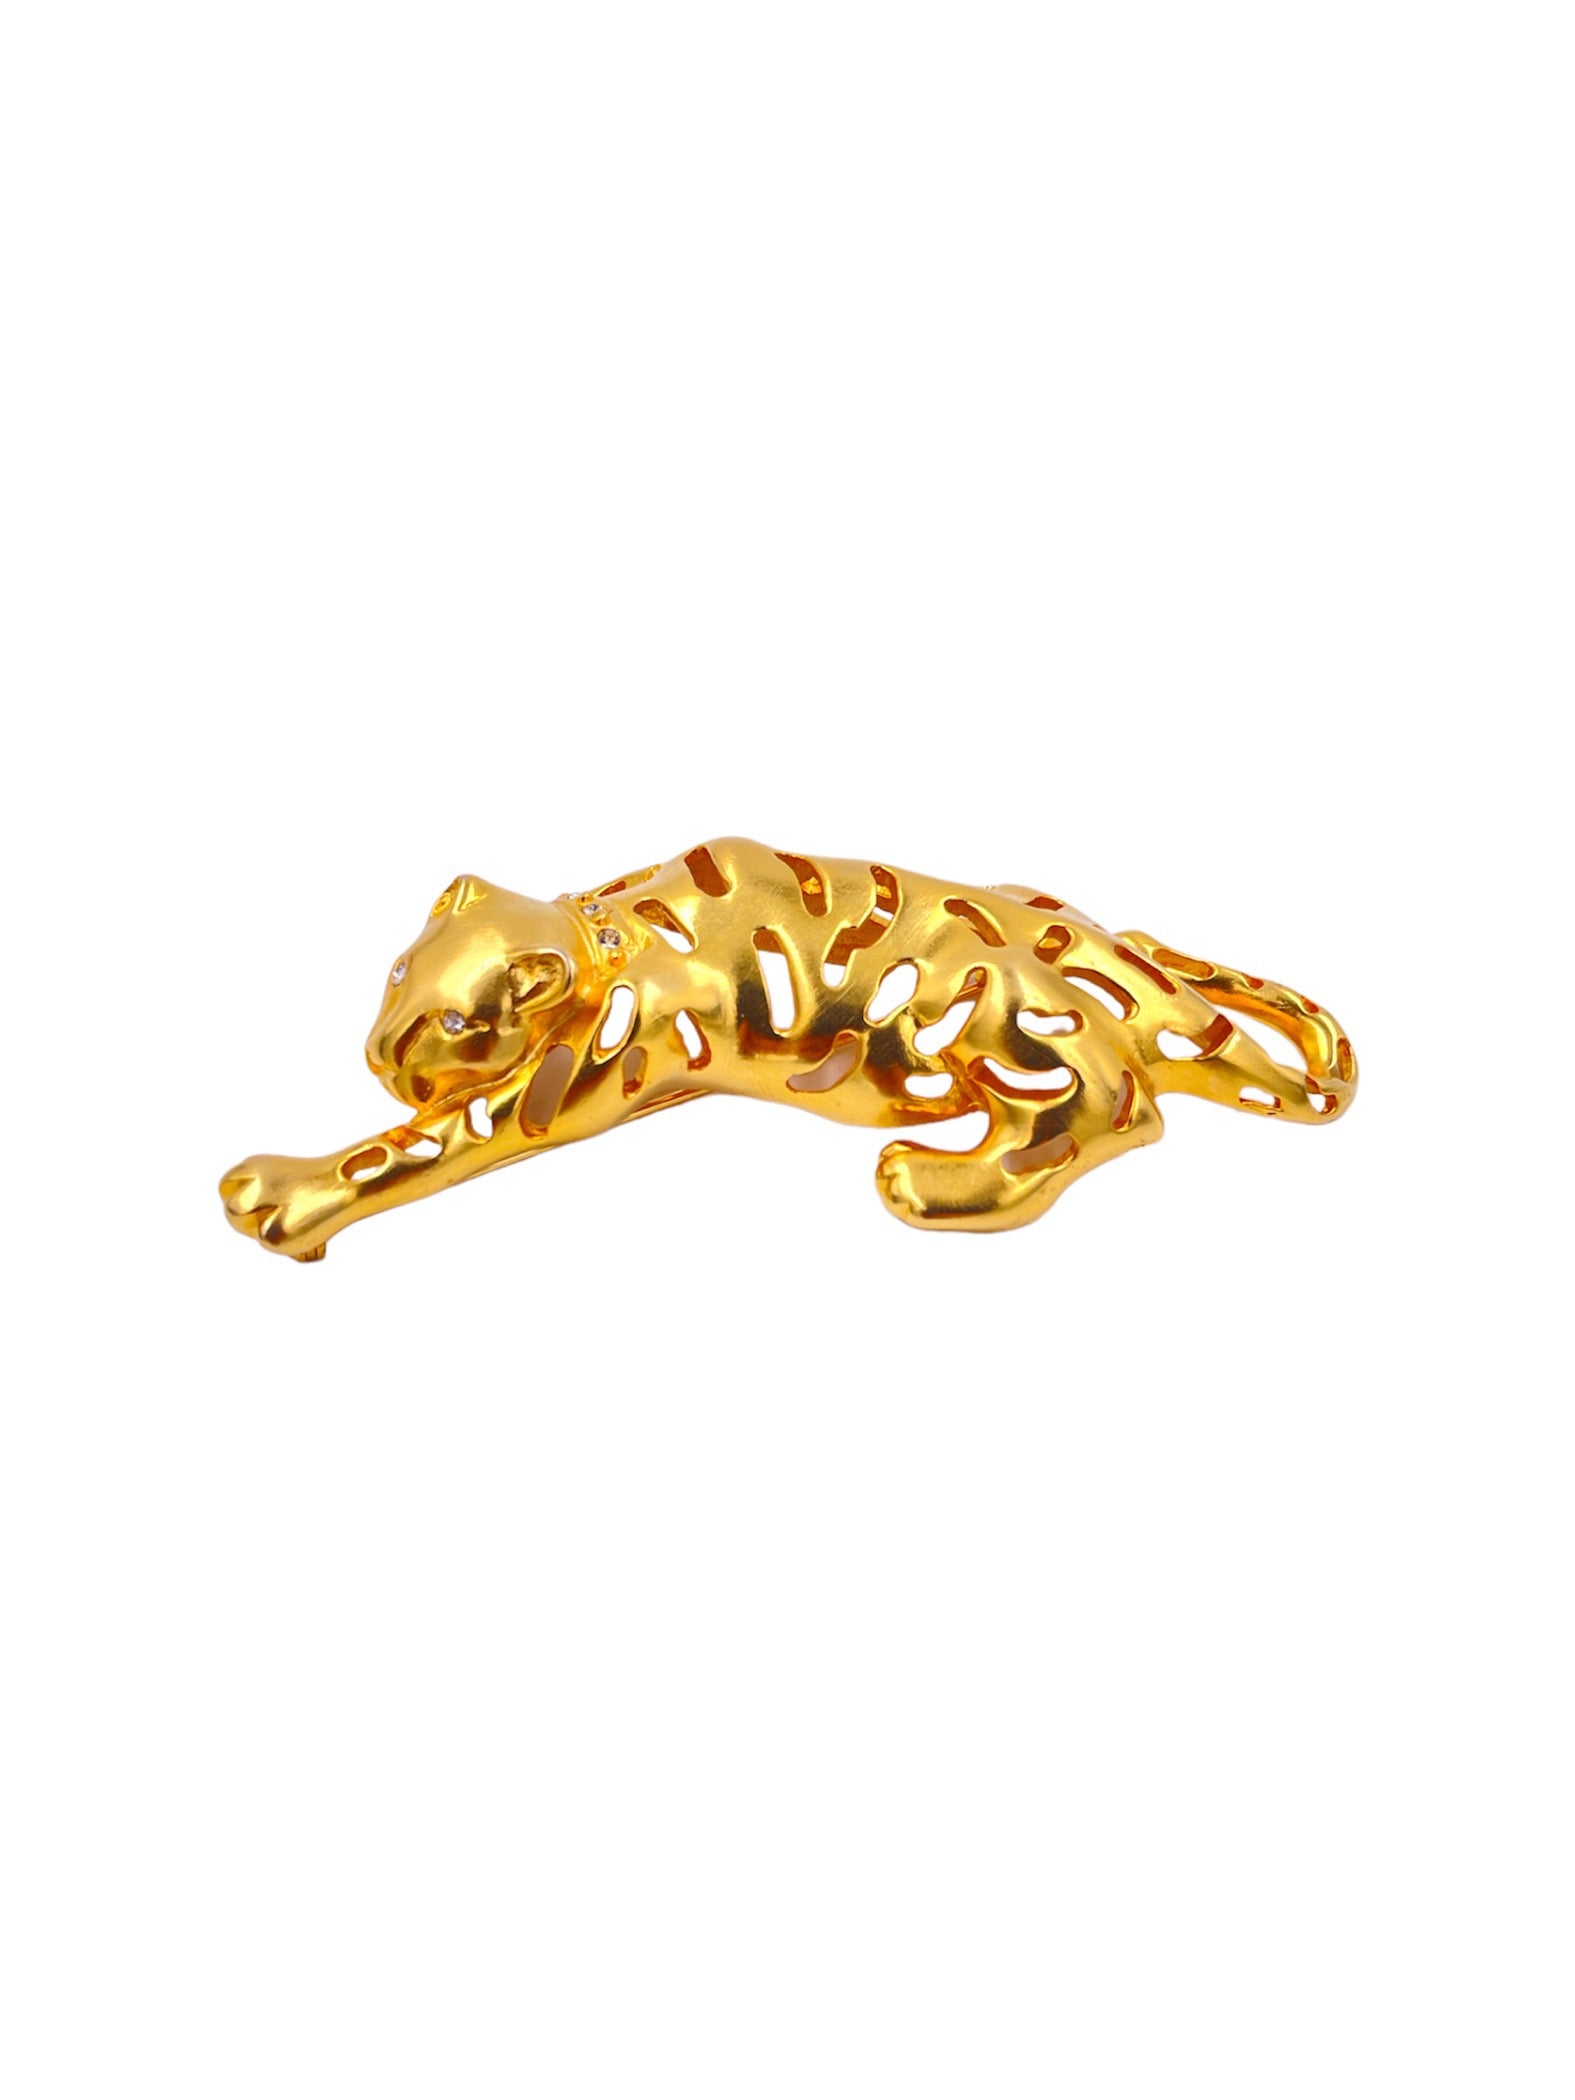 Gold Panther Brooch